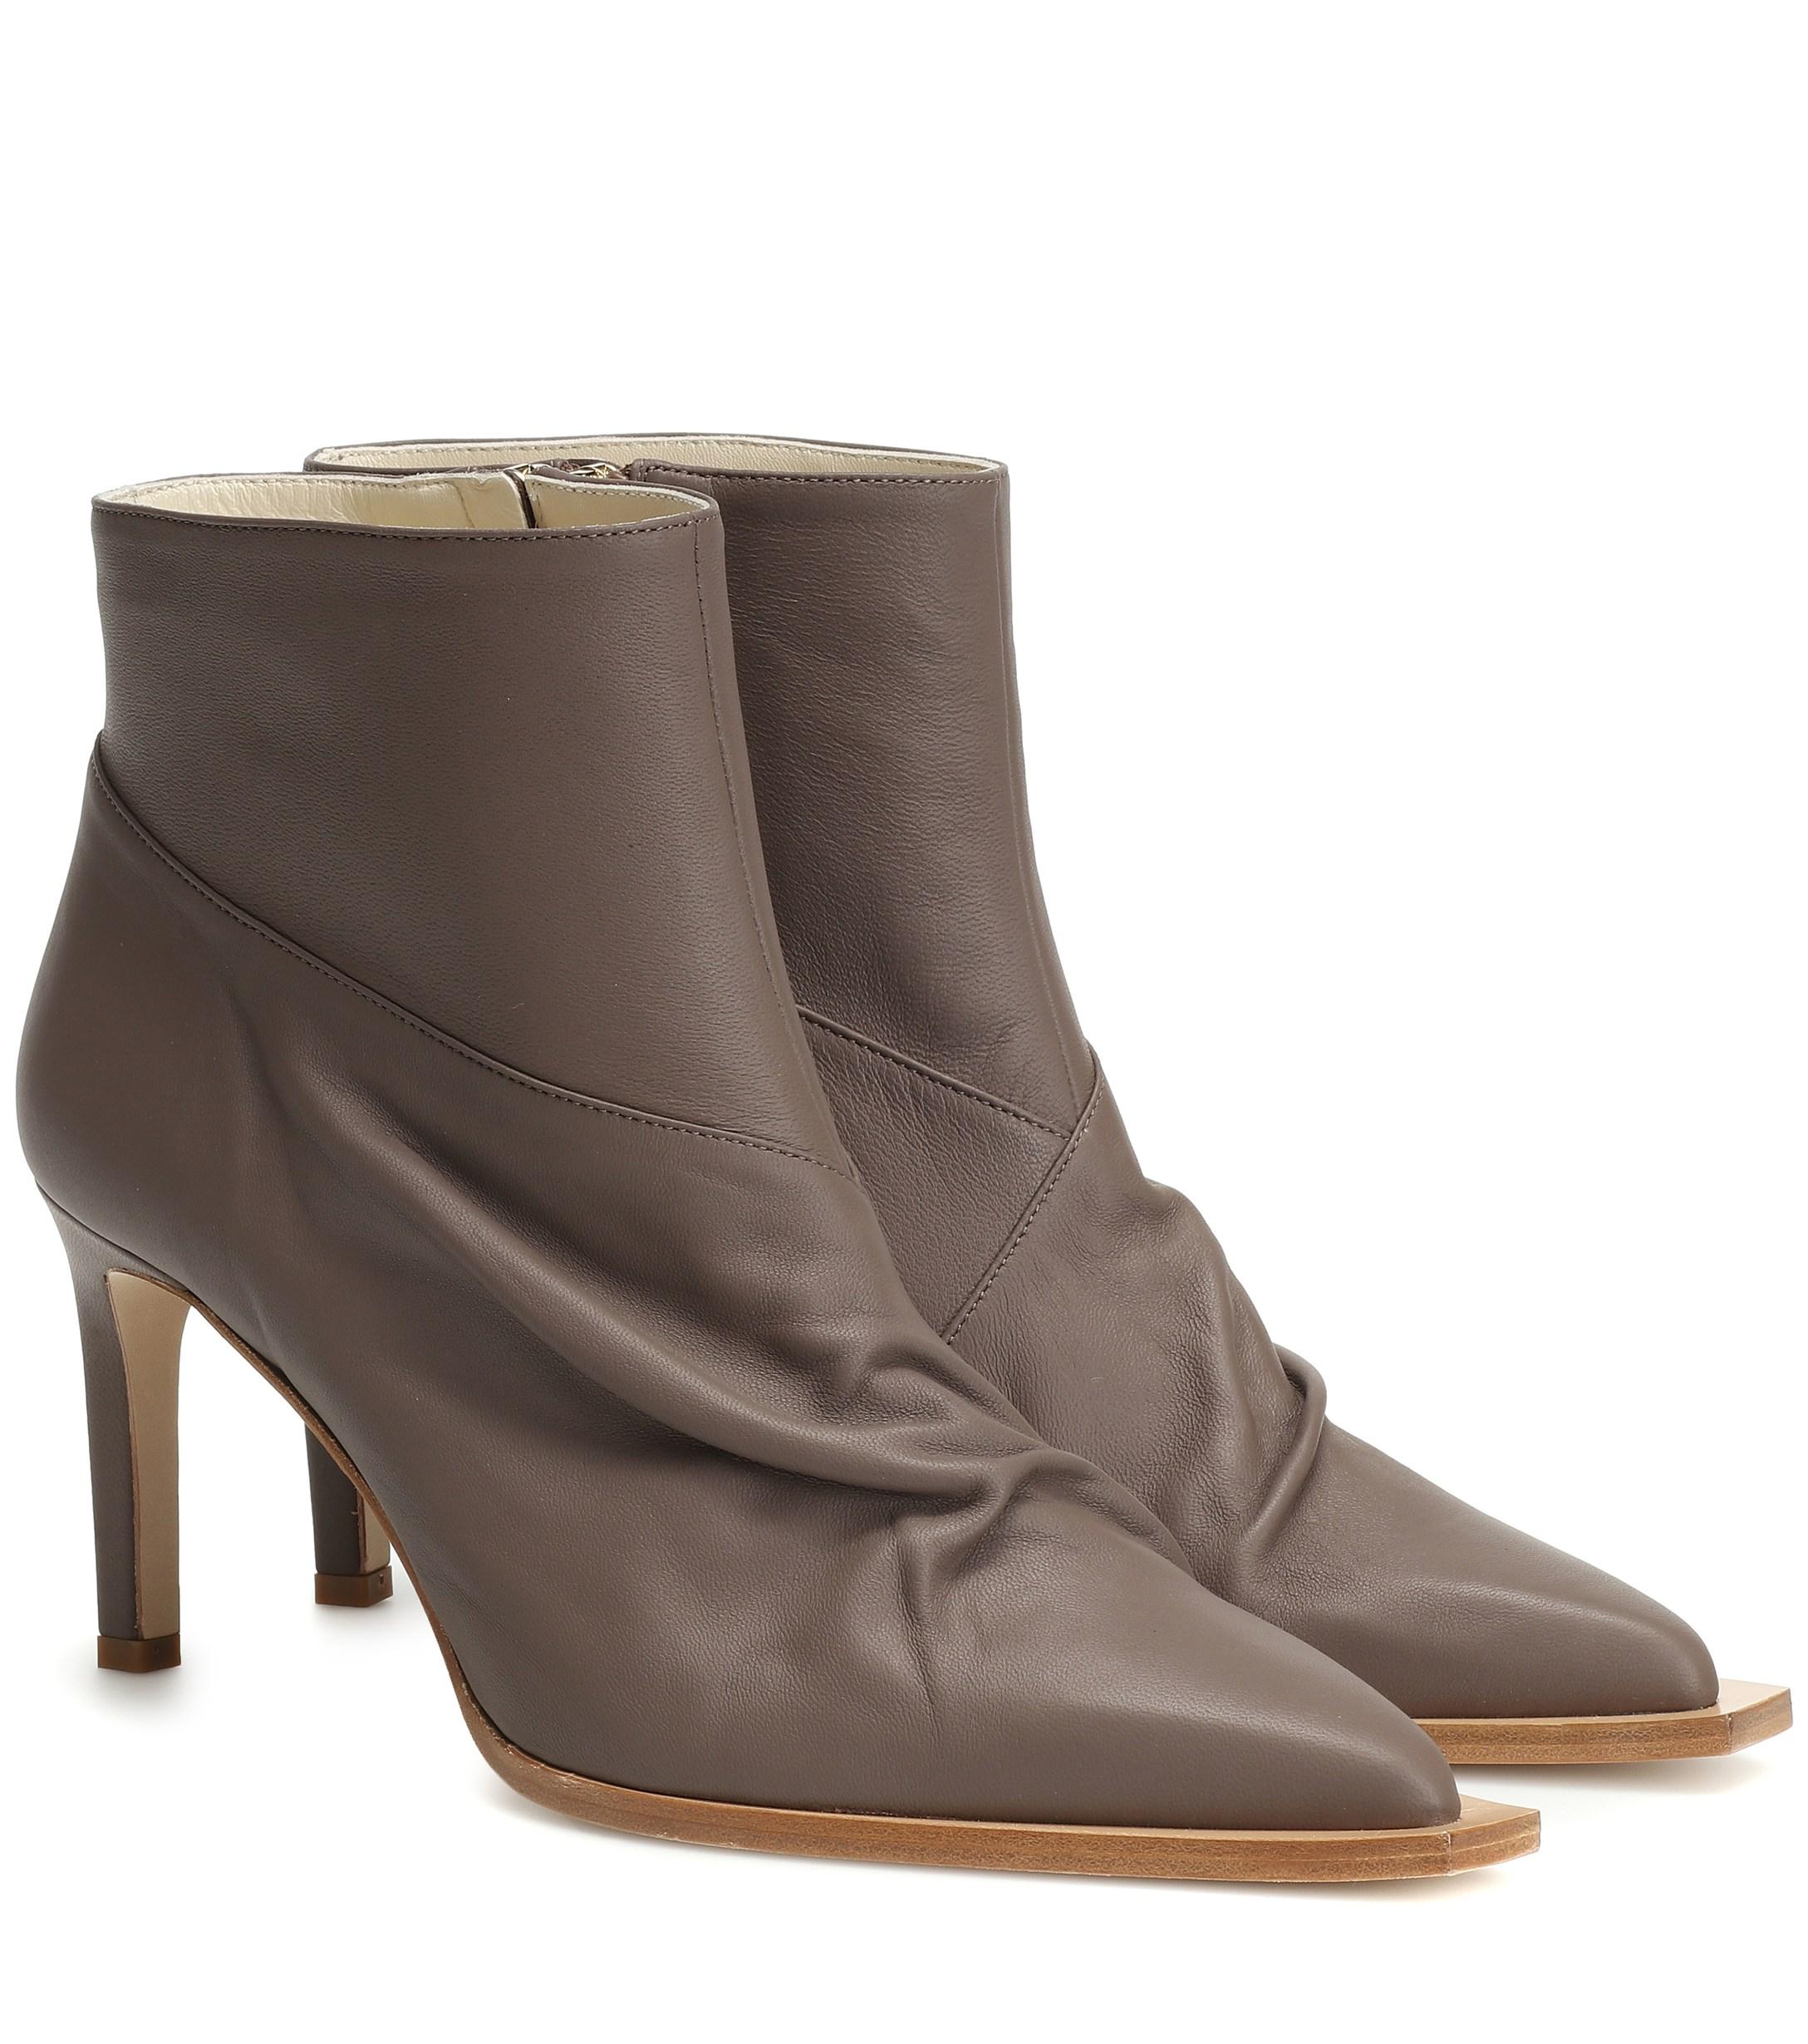 Lyst - Tibi Cato Leather Ankle Boots in Brown